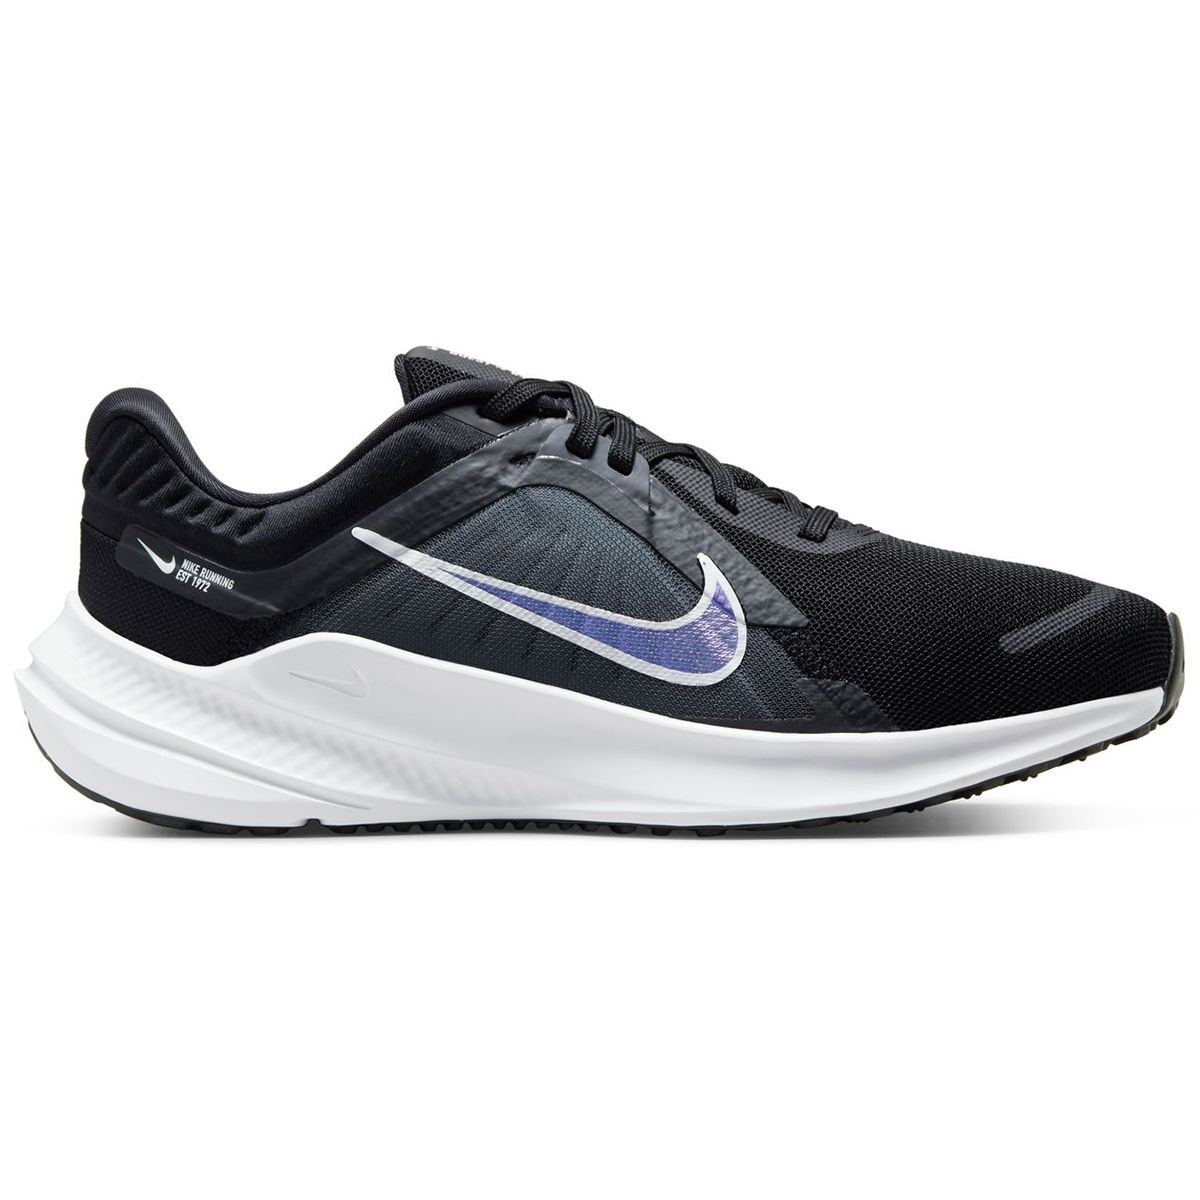 Nike Quest 5 Women's Road Running Shoes DD9291-001